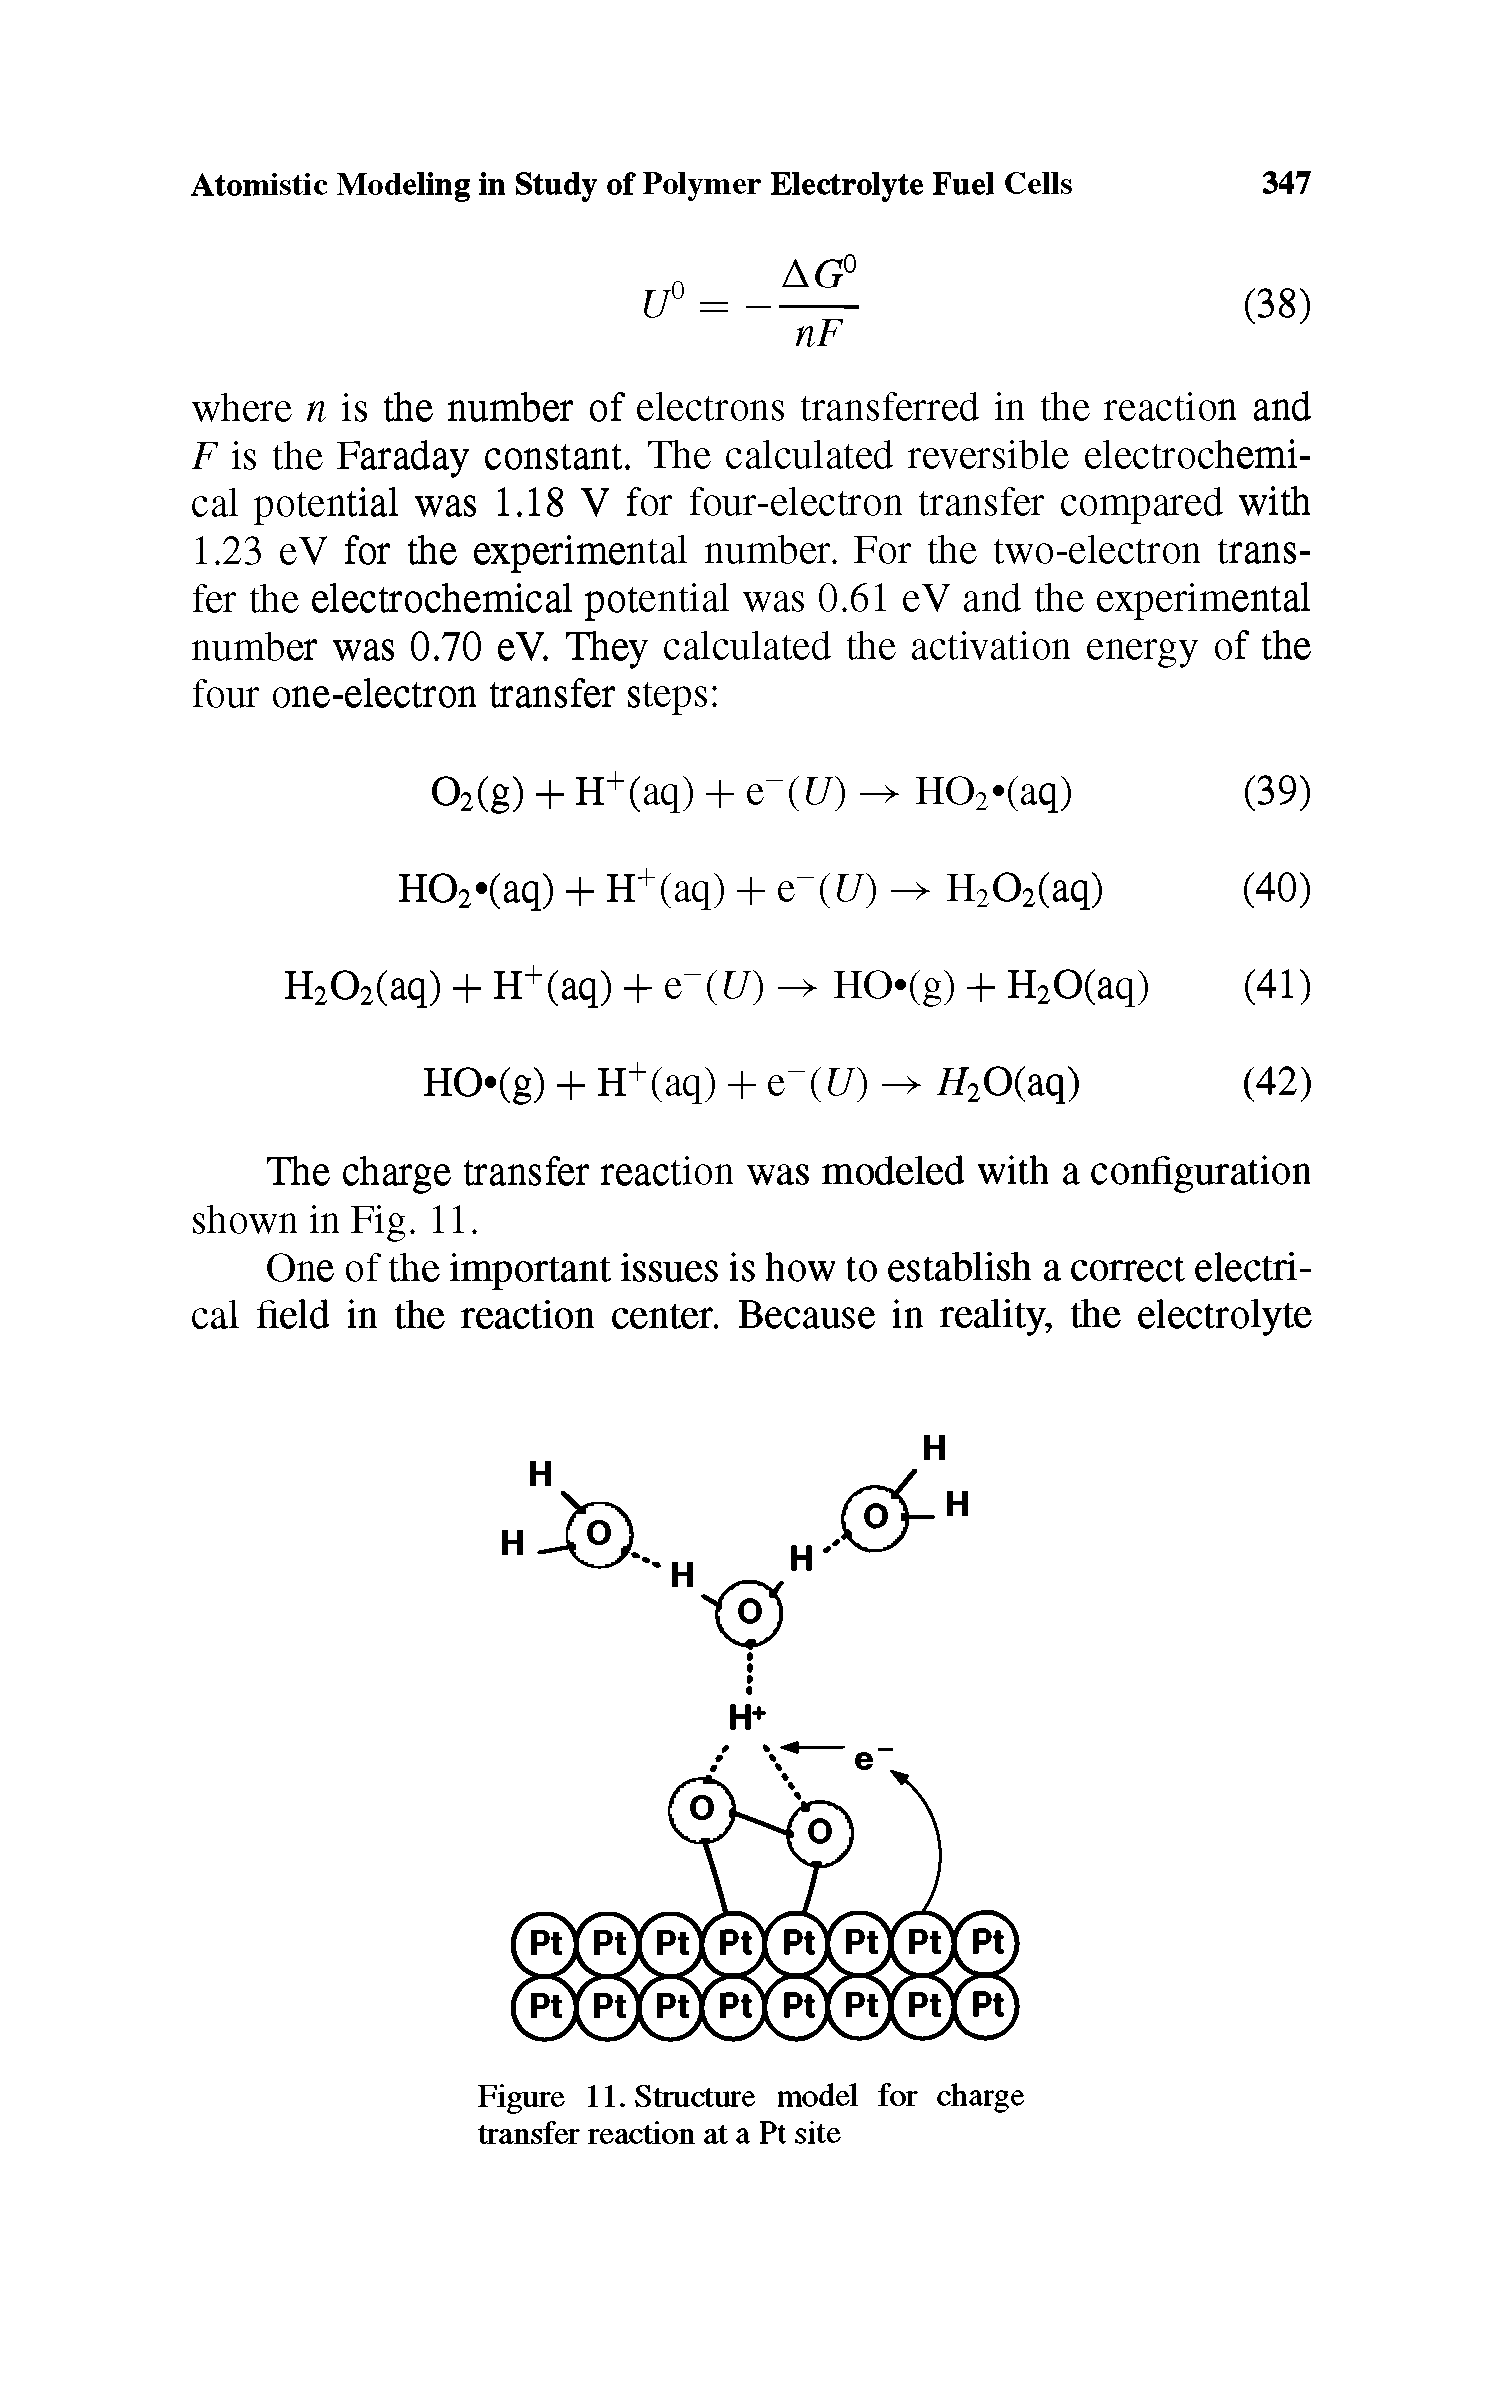 Figure 11. Structure model for charge transfer reaction at a Pt site...